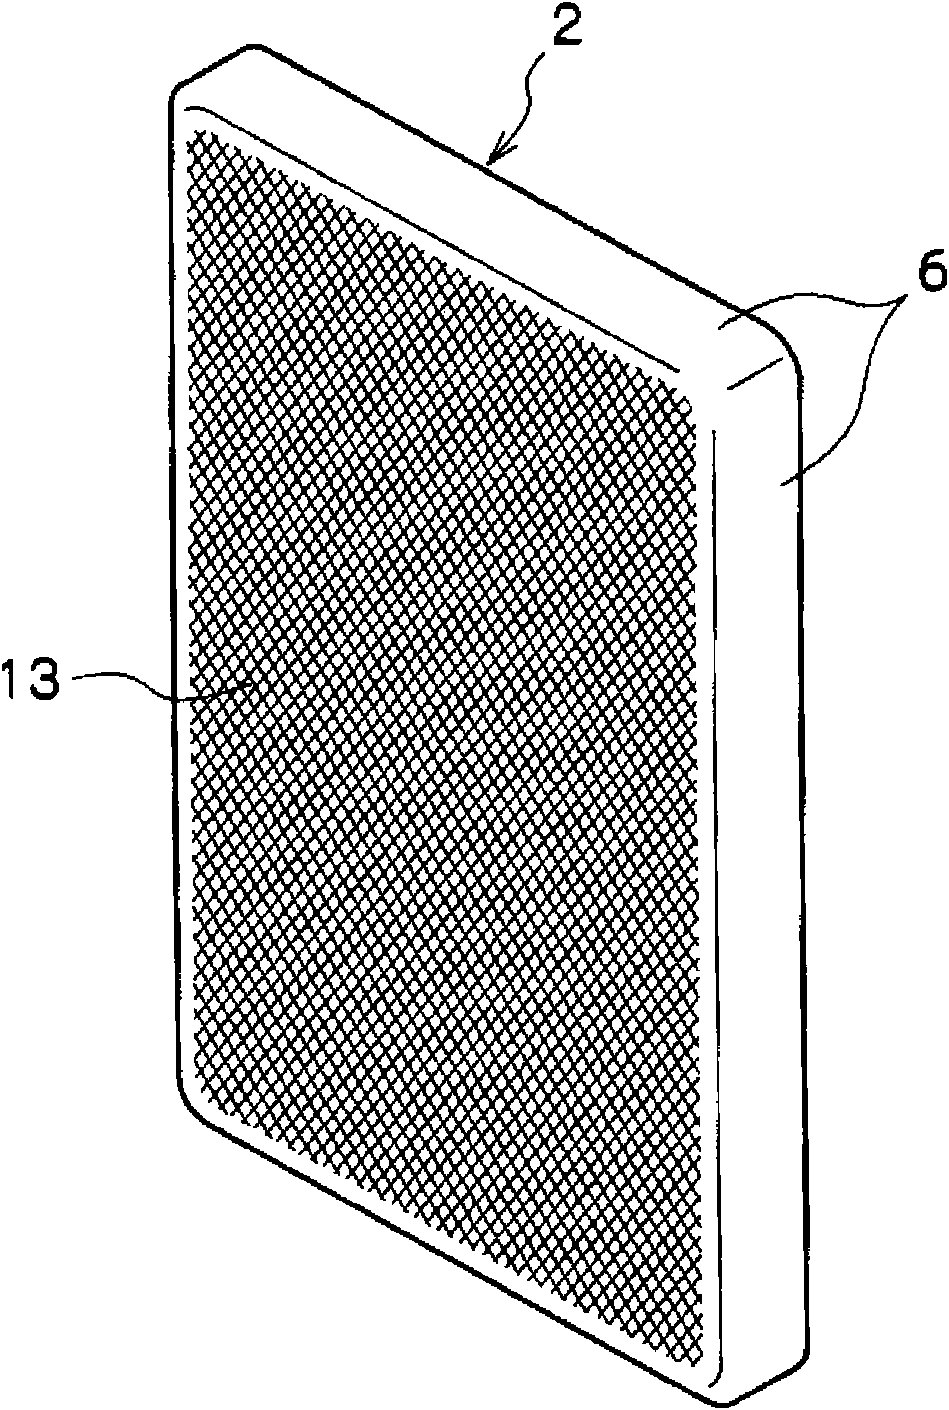 Packaging case for electro-optical device product, and its manufacturing method